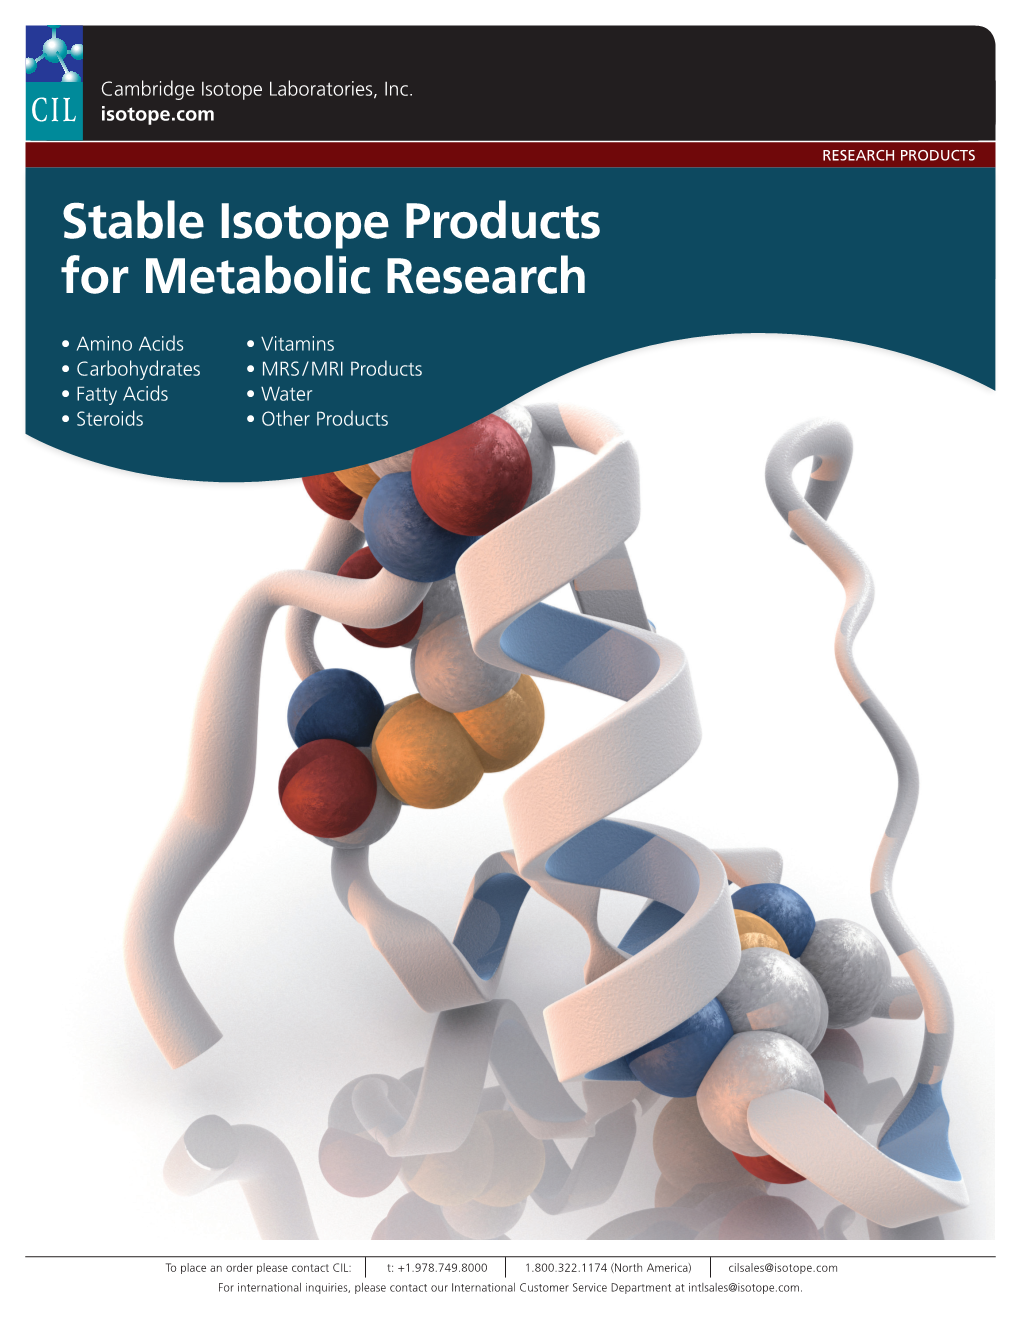 Stable Isotope Products for Metabolic Research